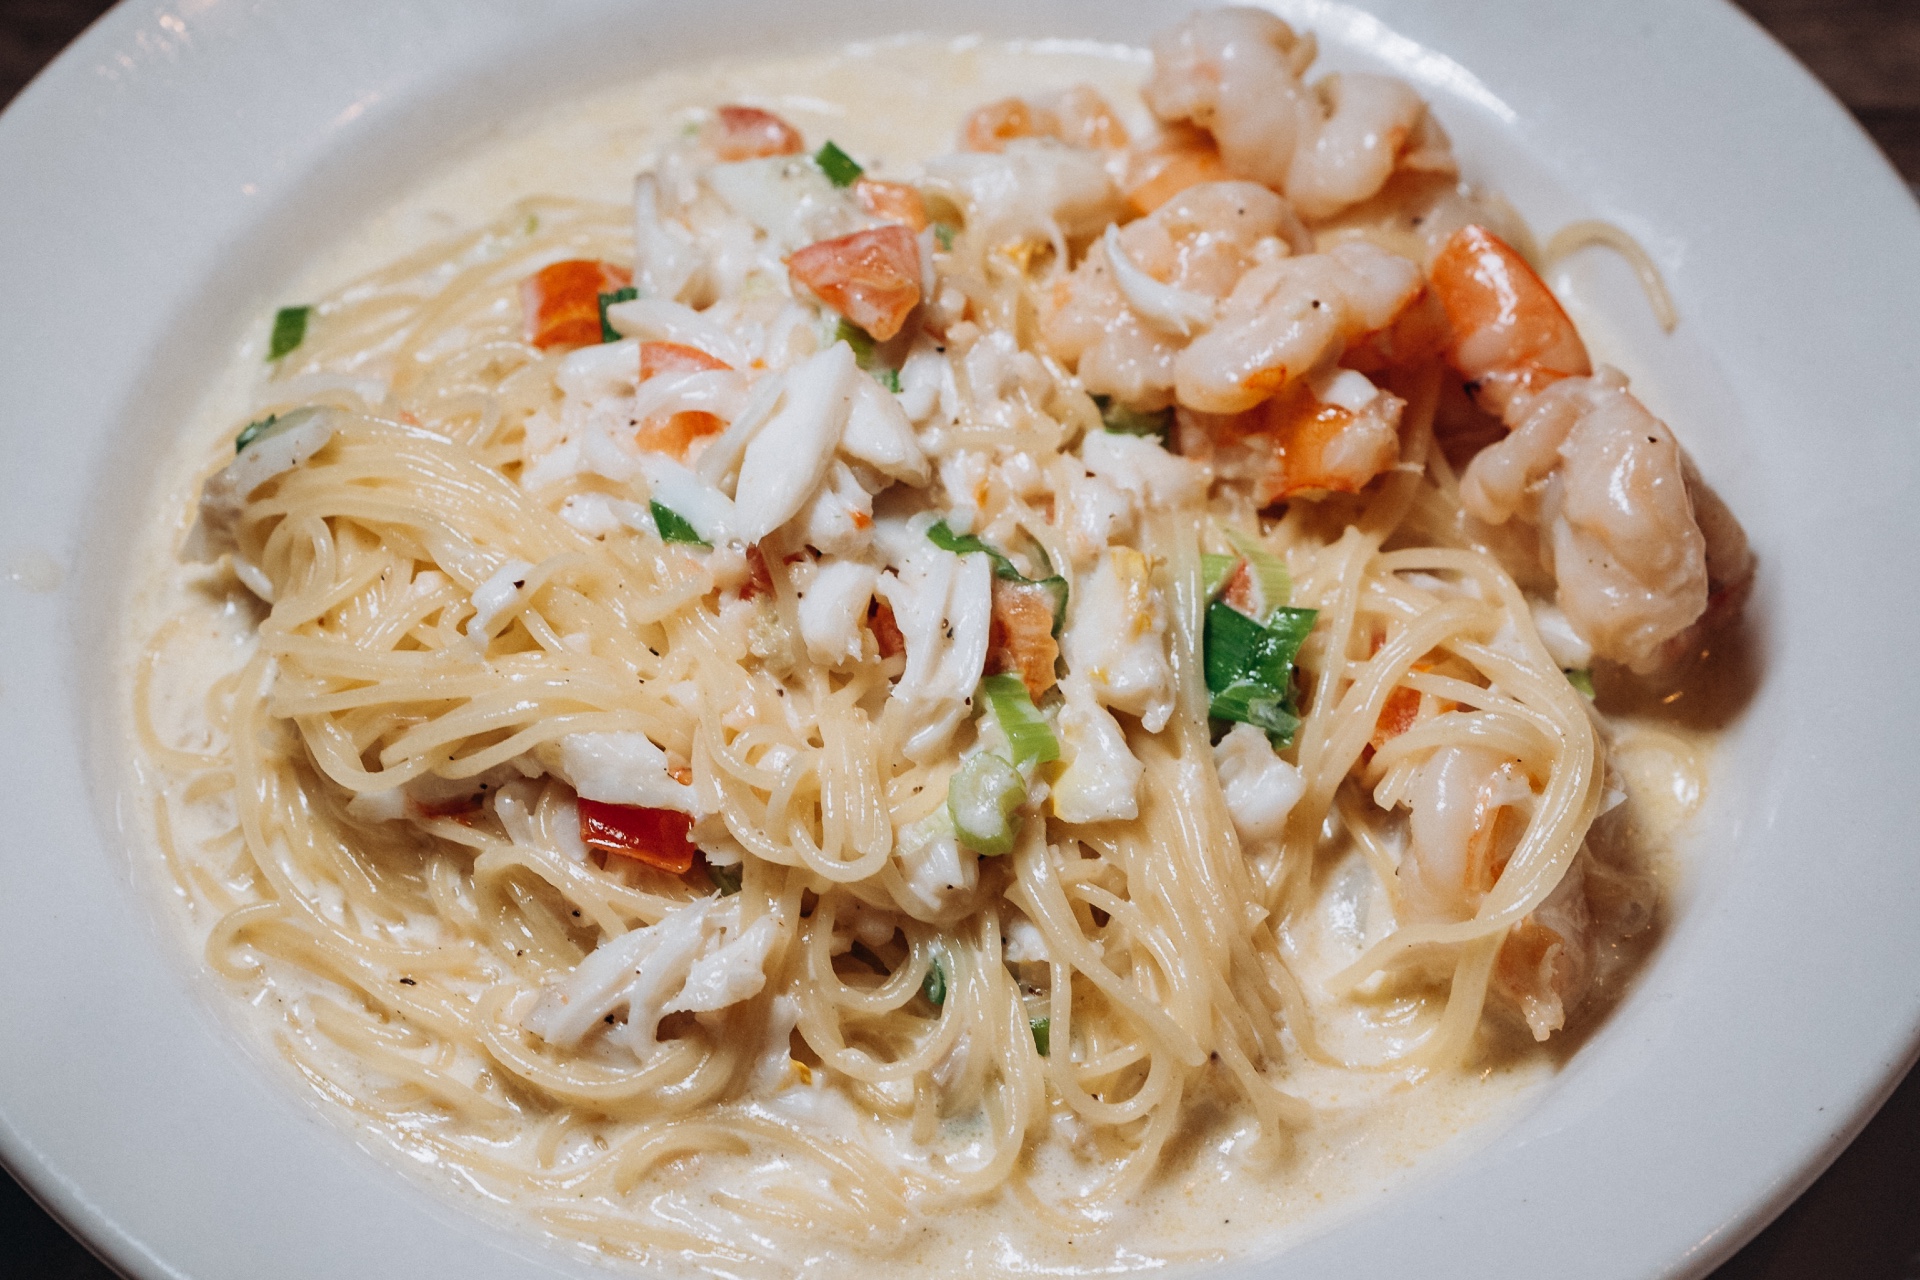 A plate of seafood pasta